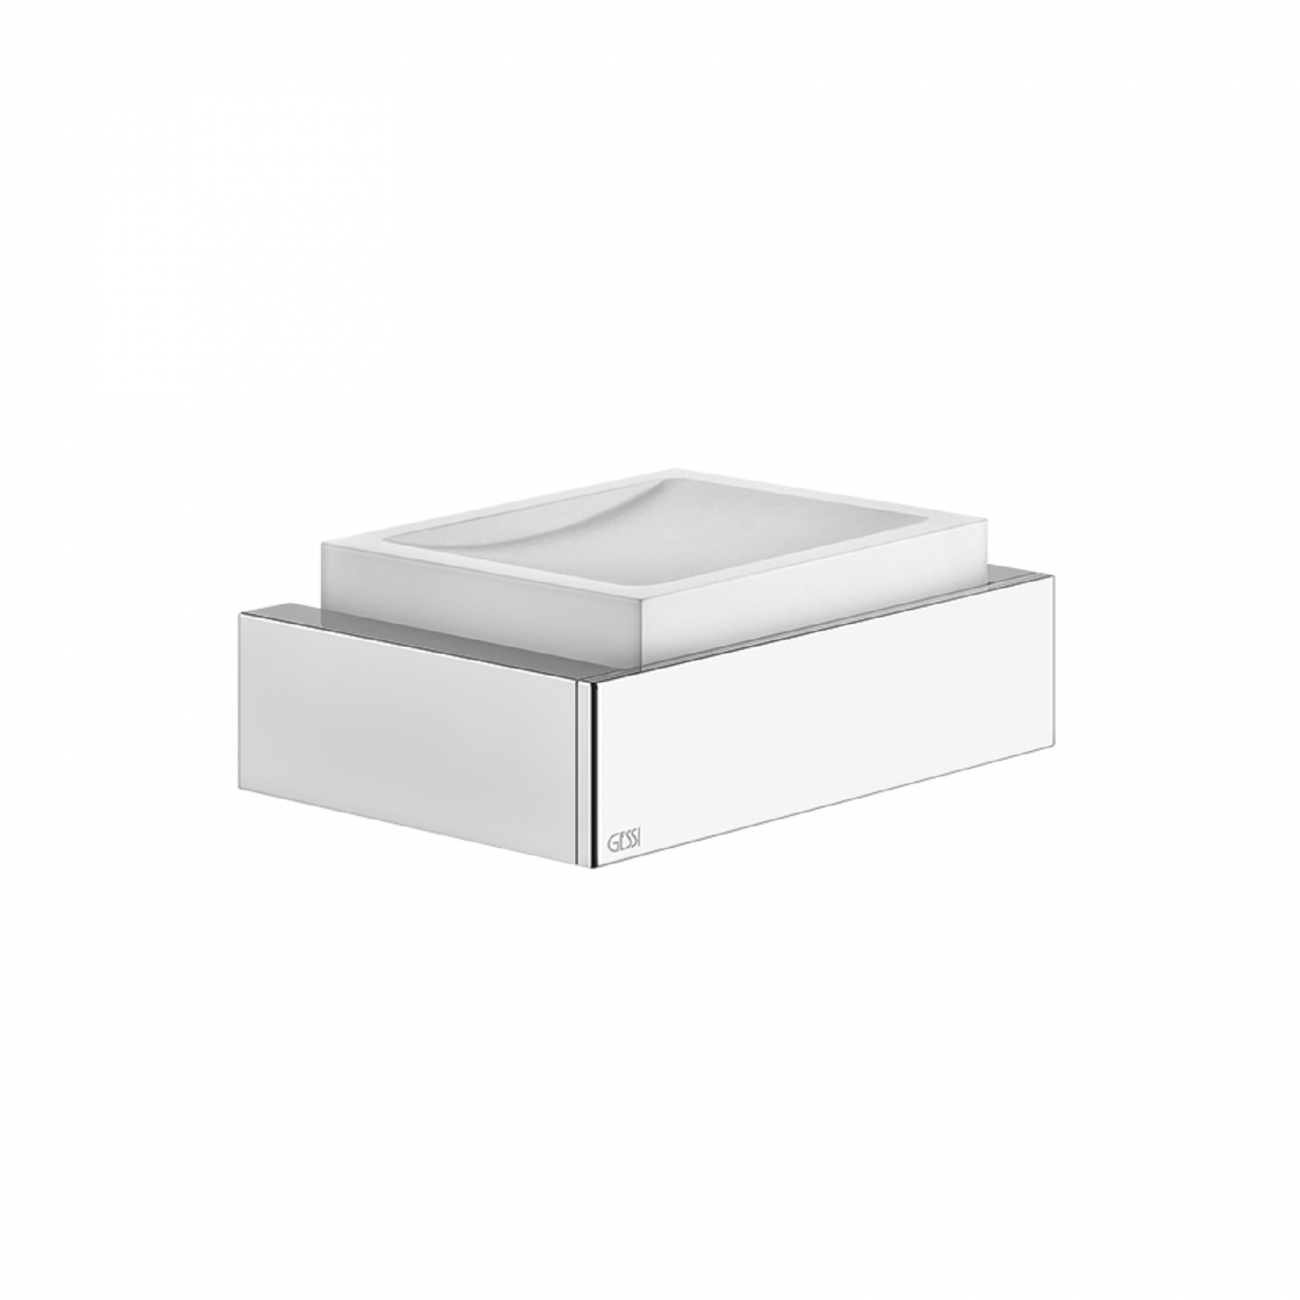 GESSI RETTANGOLO ACCESSORIES WALL MOUNTED SOAP HOLDER